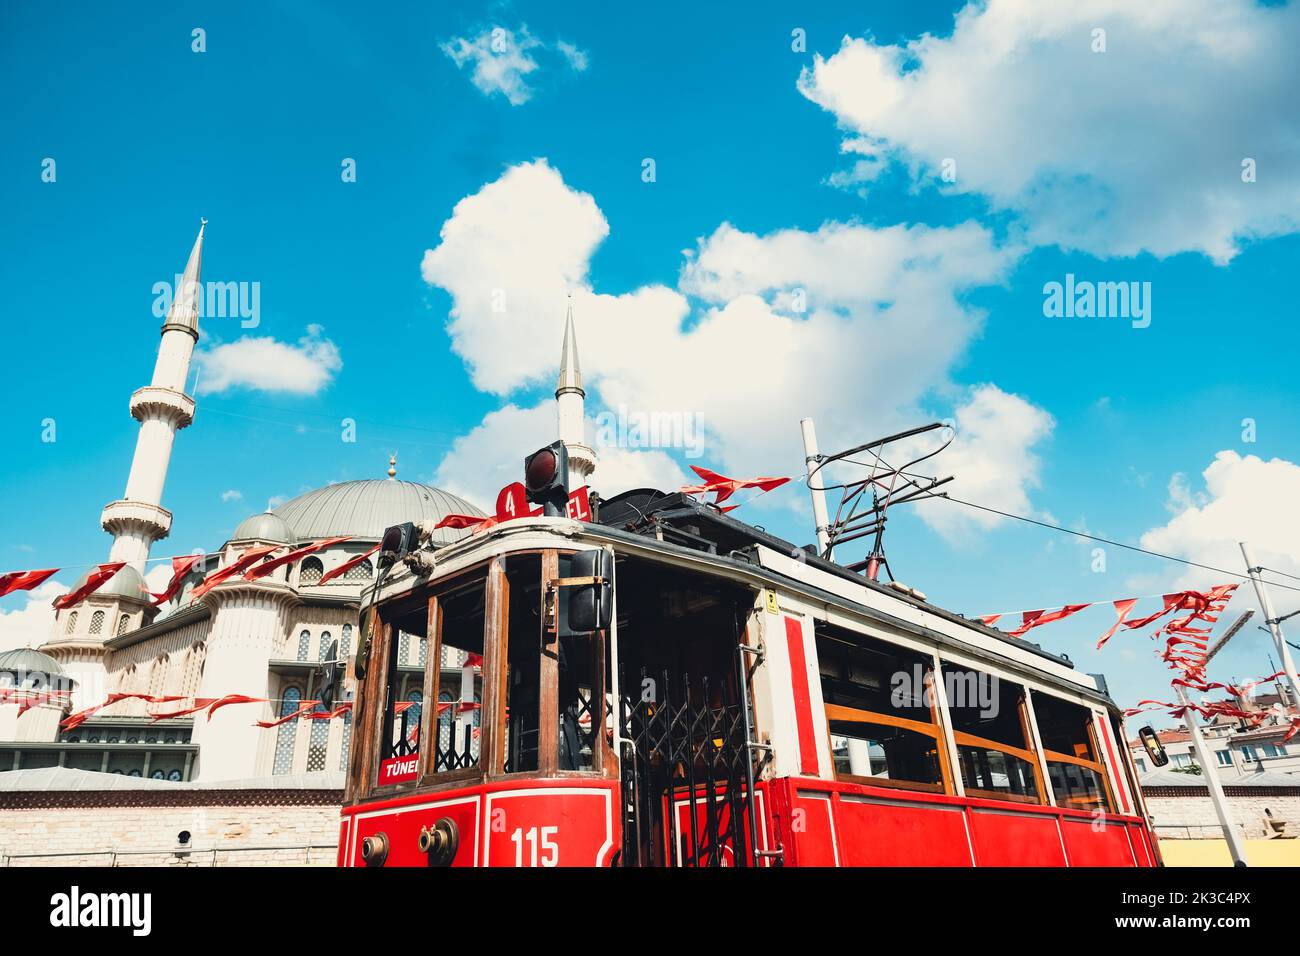 Taksim historical tram with Taksim Mosque in background, beautiful cityscape in Istanbul, blue cloudy sky, travel destination in Turkey, scenery retro train in sunny day, sightseeing place in Istanbul Stock Photo